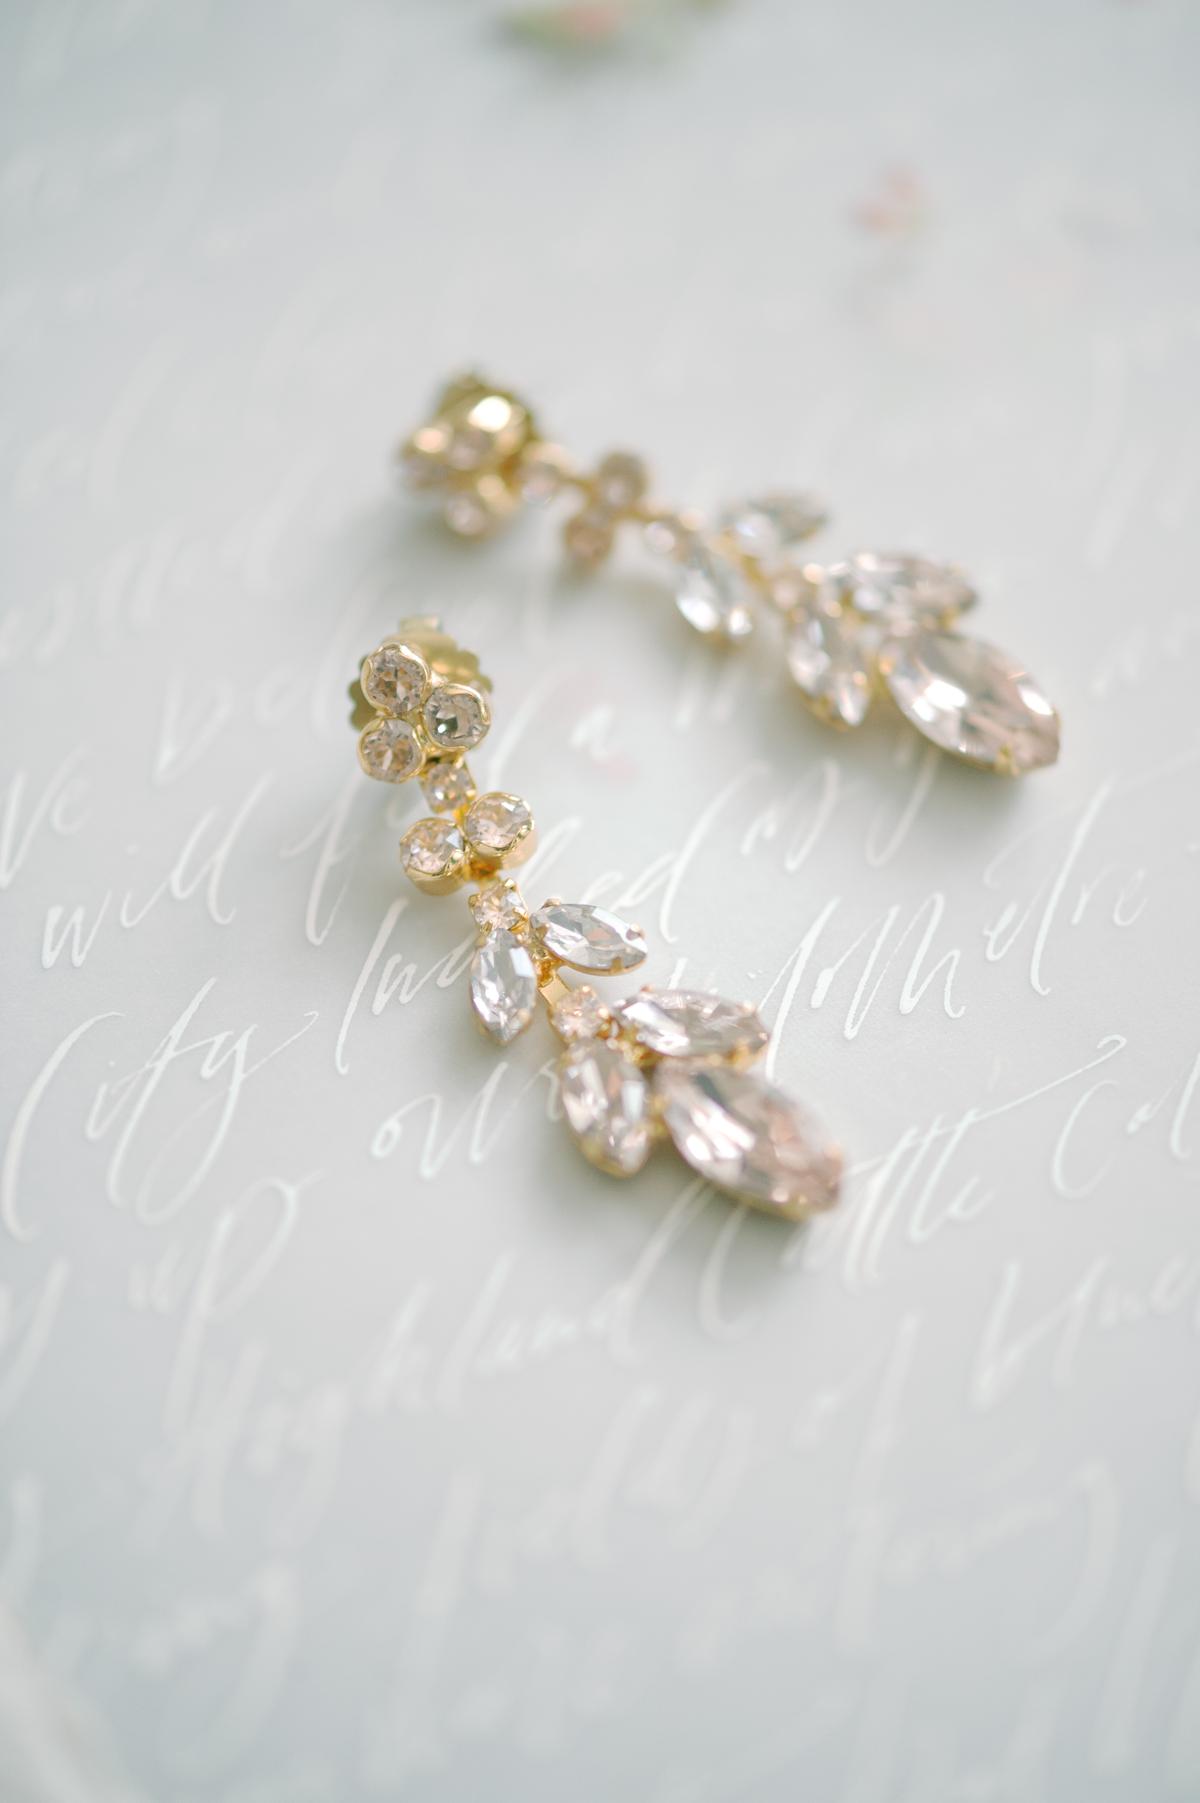 crystal petal drip earrings from BHLDN with calligraphed vows on vellum paper; photography by Julie Livingston at an English country estate Hedsor House with planning and design by Willow and Oak Events